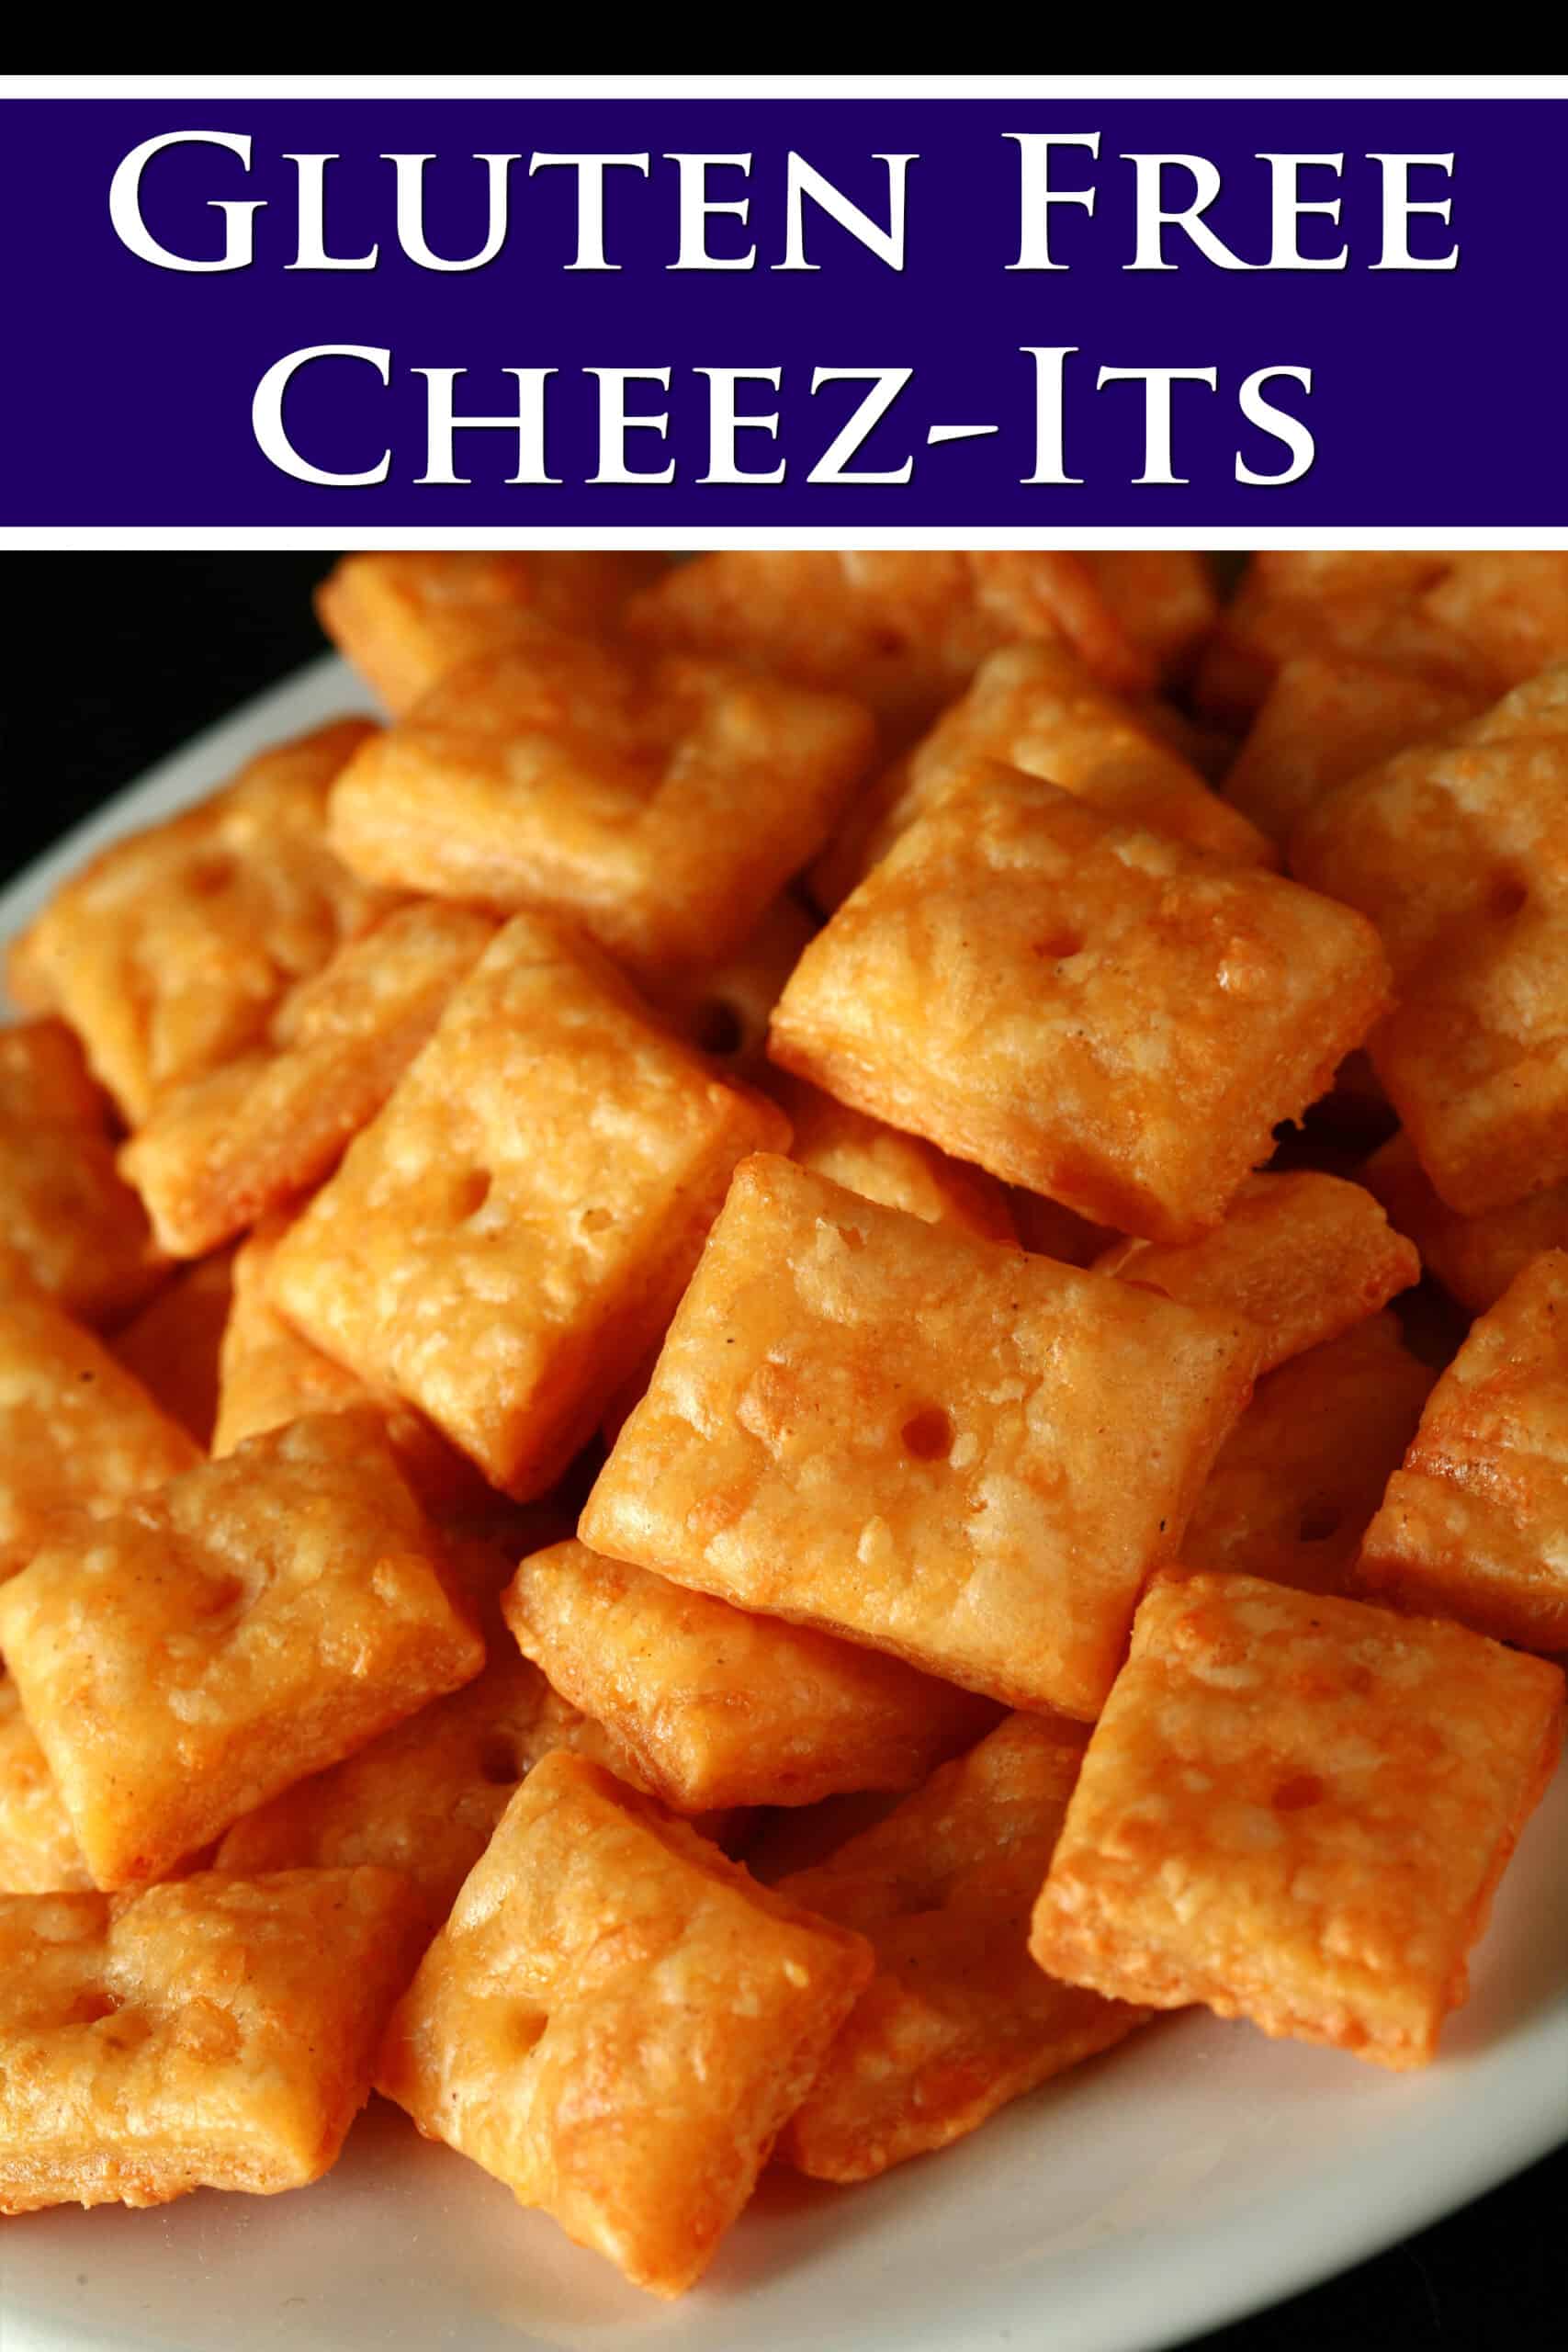 A plate of gluten free cheese its crackers.  Overlaid text says gluten-free cheez its.